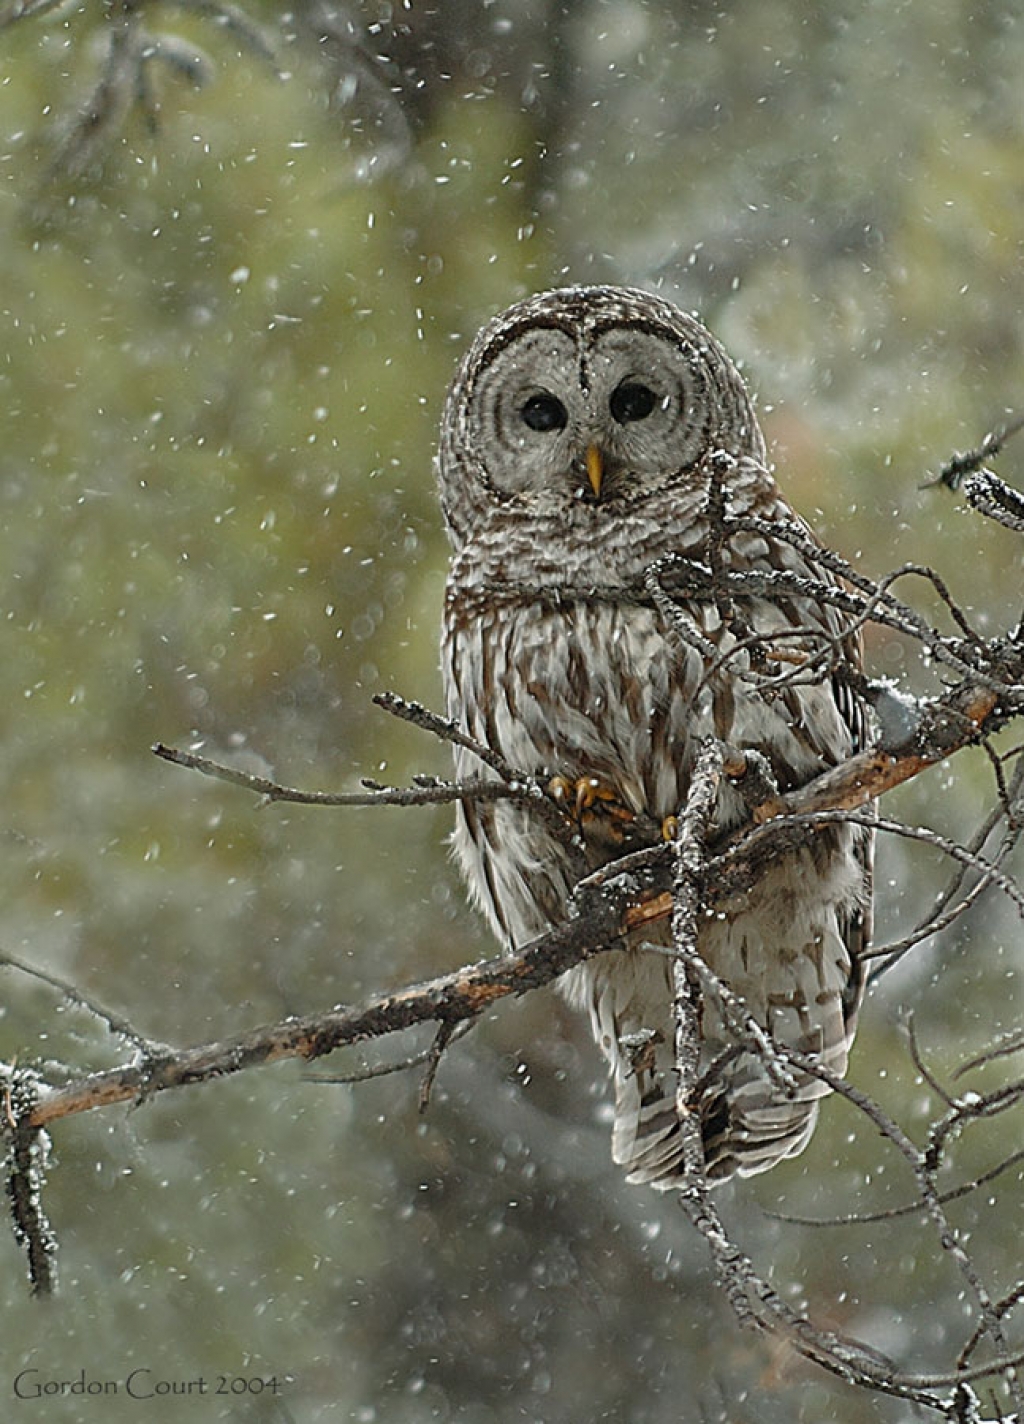 The barred owl will be a special guest this Sunday at the Strathcona Wilderness Centre, as part of the world Snow Day celebration.